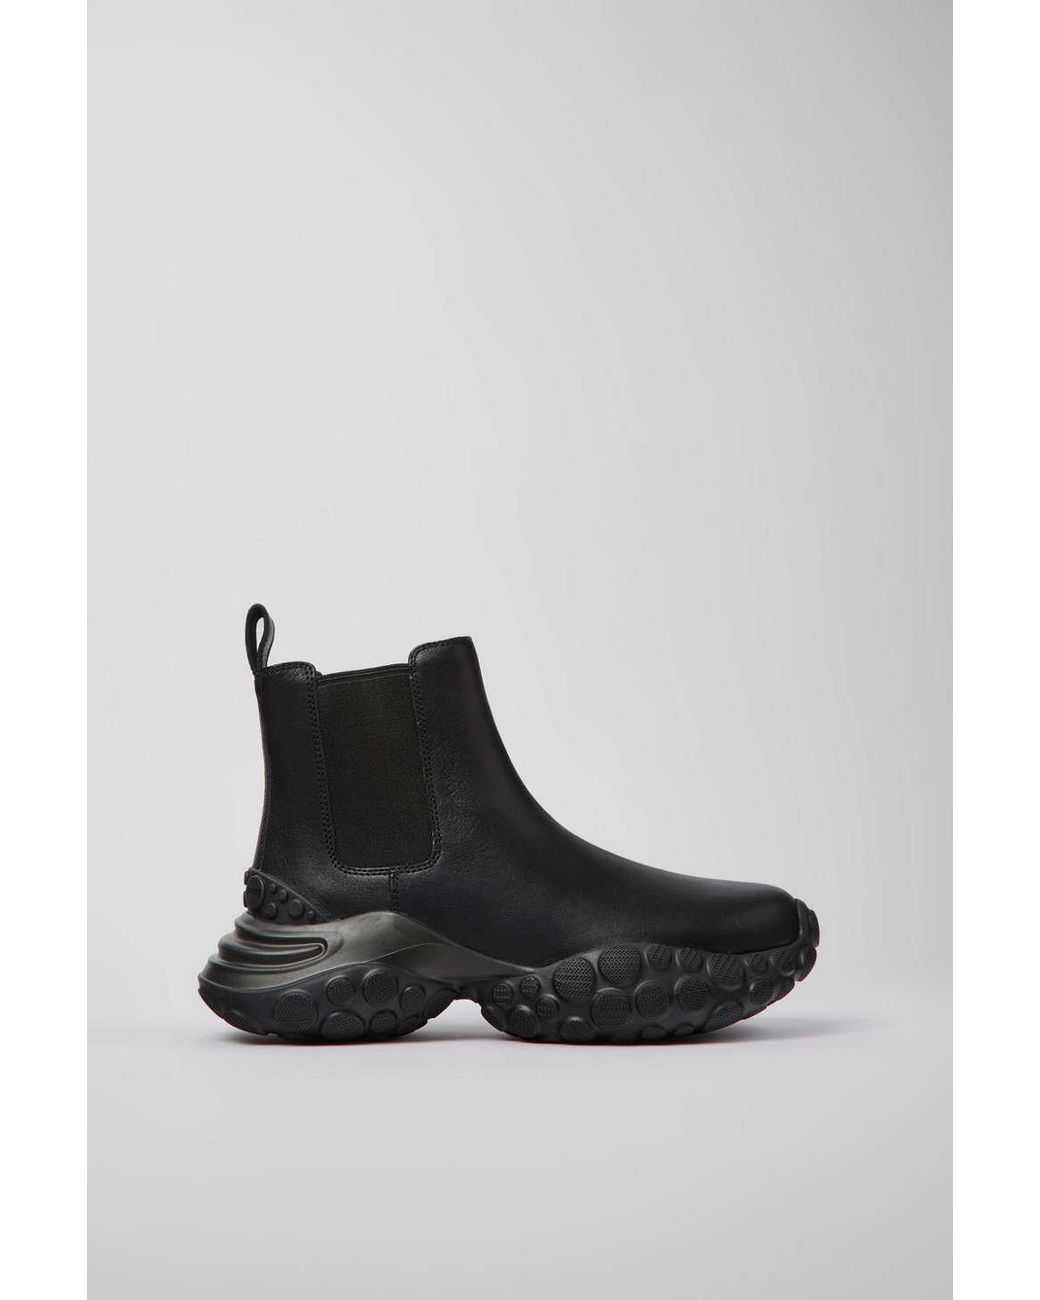 Camper Pelotas Mars Leather Chelsea Boot In Black,at Urban Outfitters | Lyst